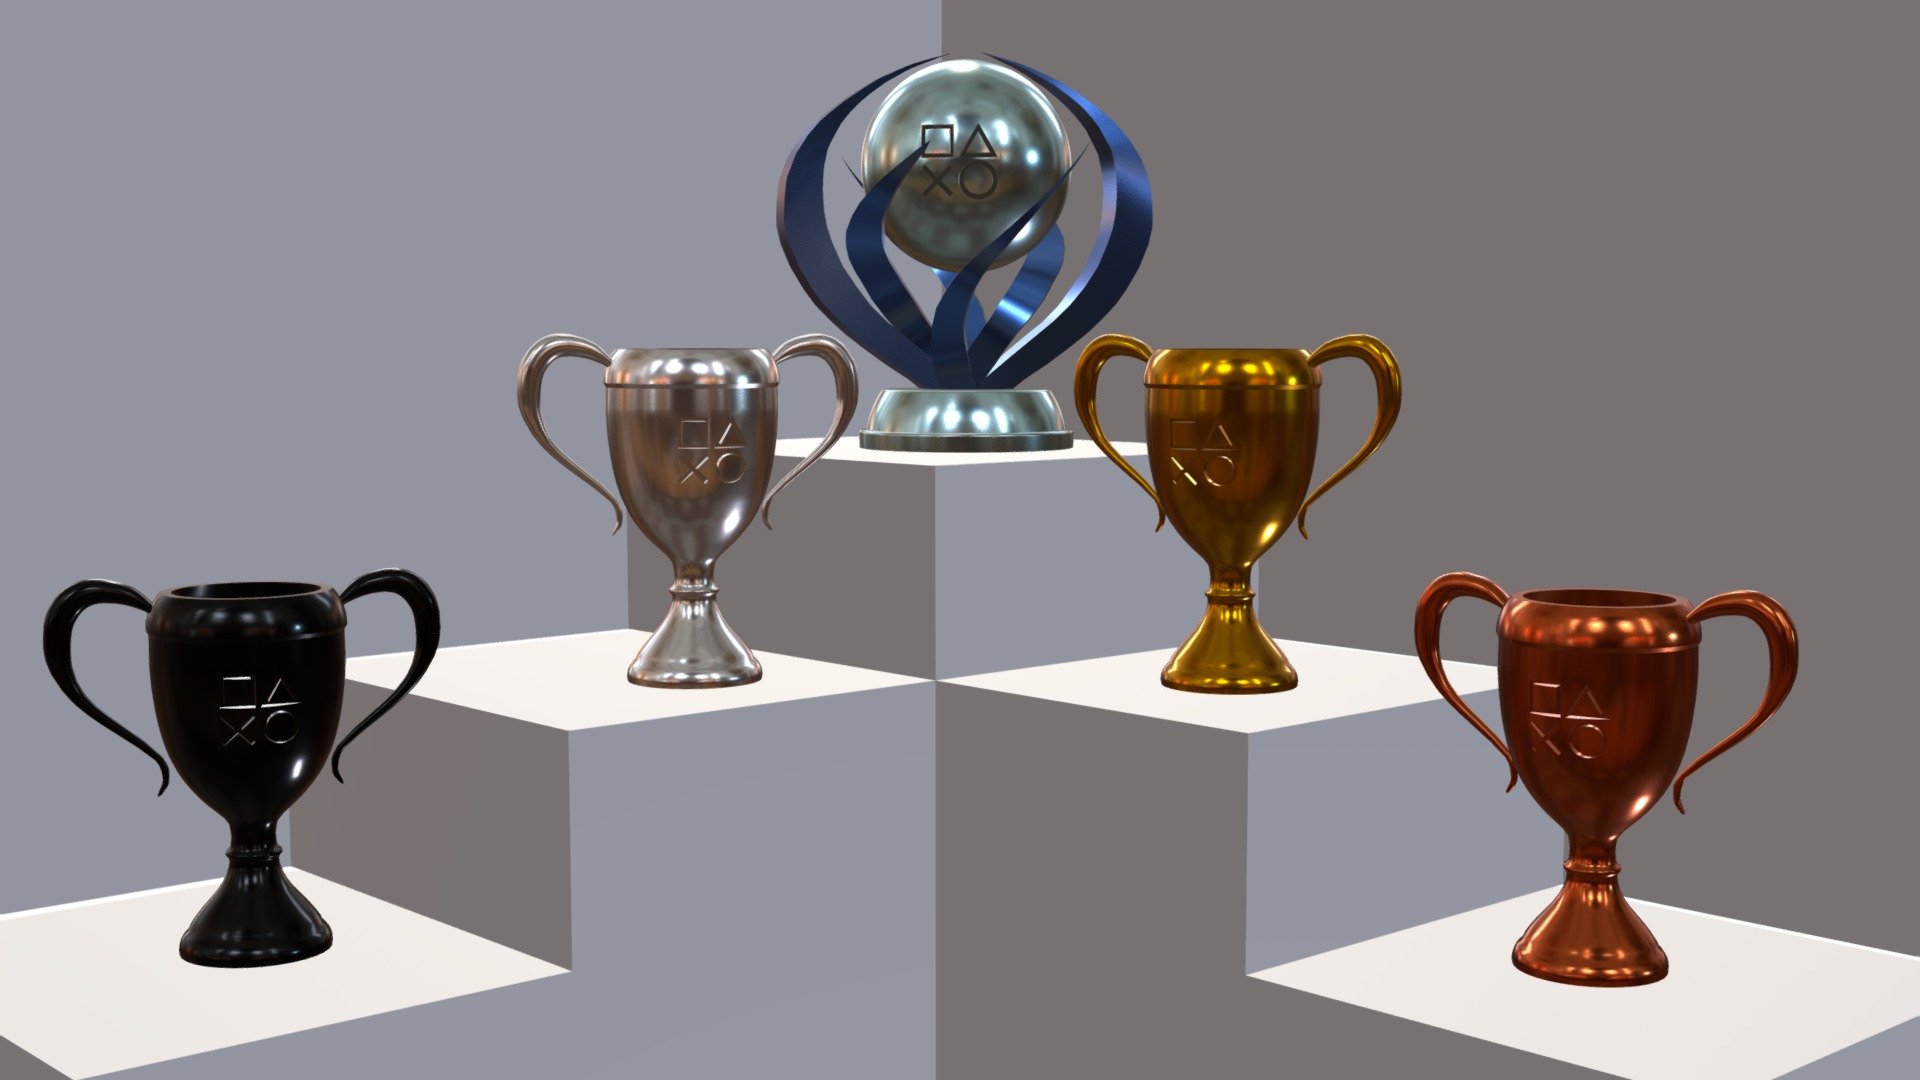 I went ahead and uploaded the entire trophy set. I also have the platinum trophy on my profile as a viewable singular object as well. This was fun and now I can move onto the next thing! :) - ALL Playstation Trophies - 3D model by Alex M. (@strombringer744) 3d model